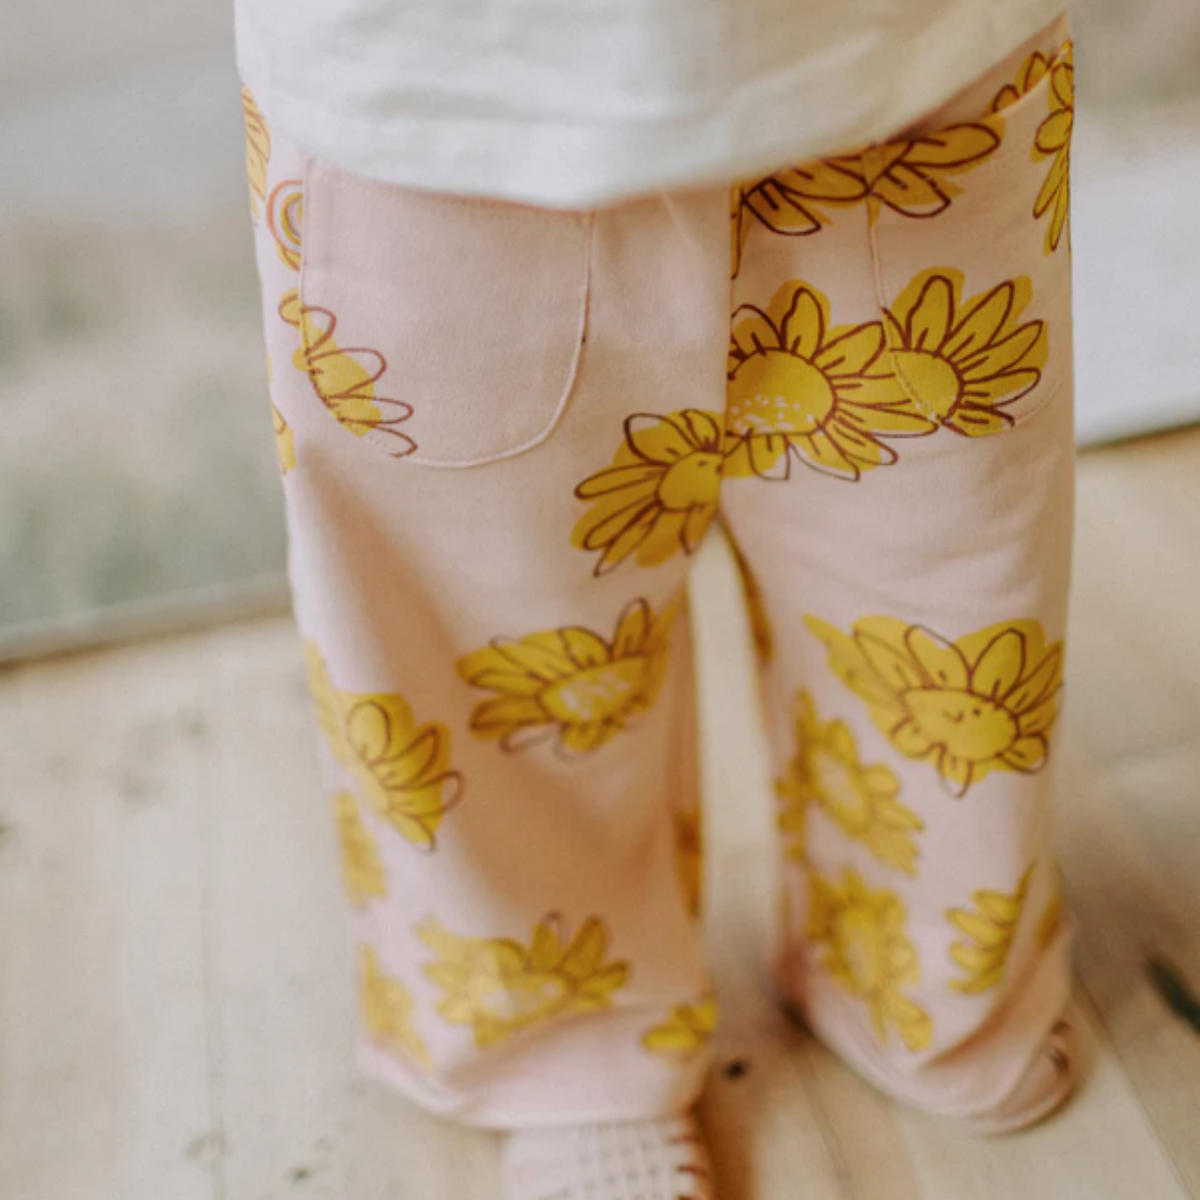 Baby Flower Power Pant, Pink